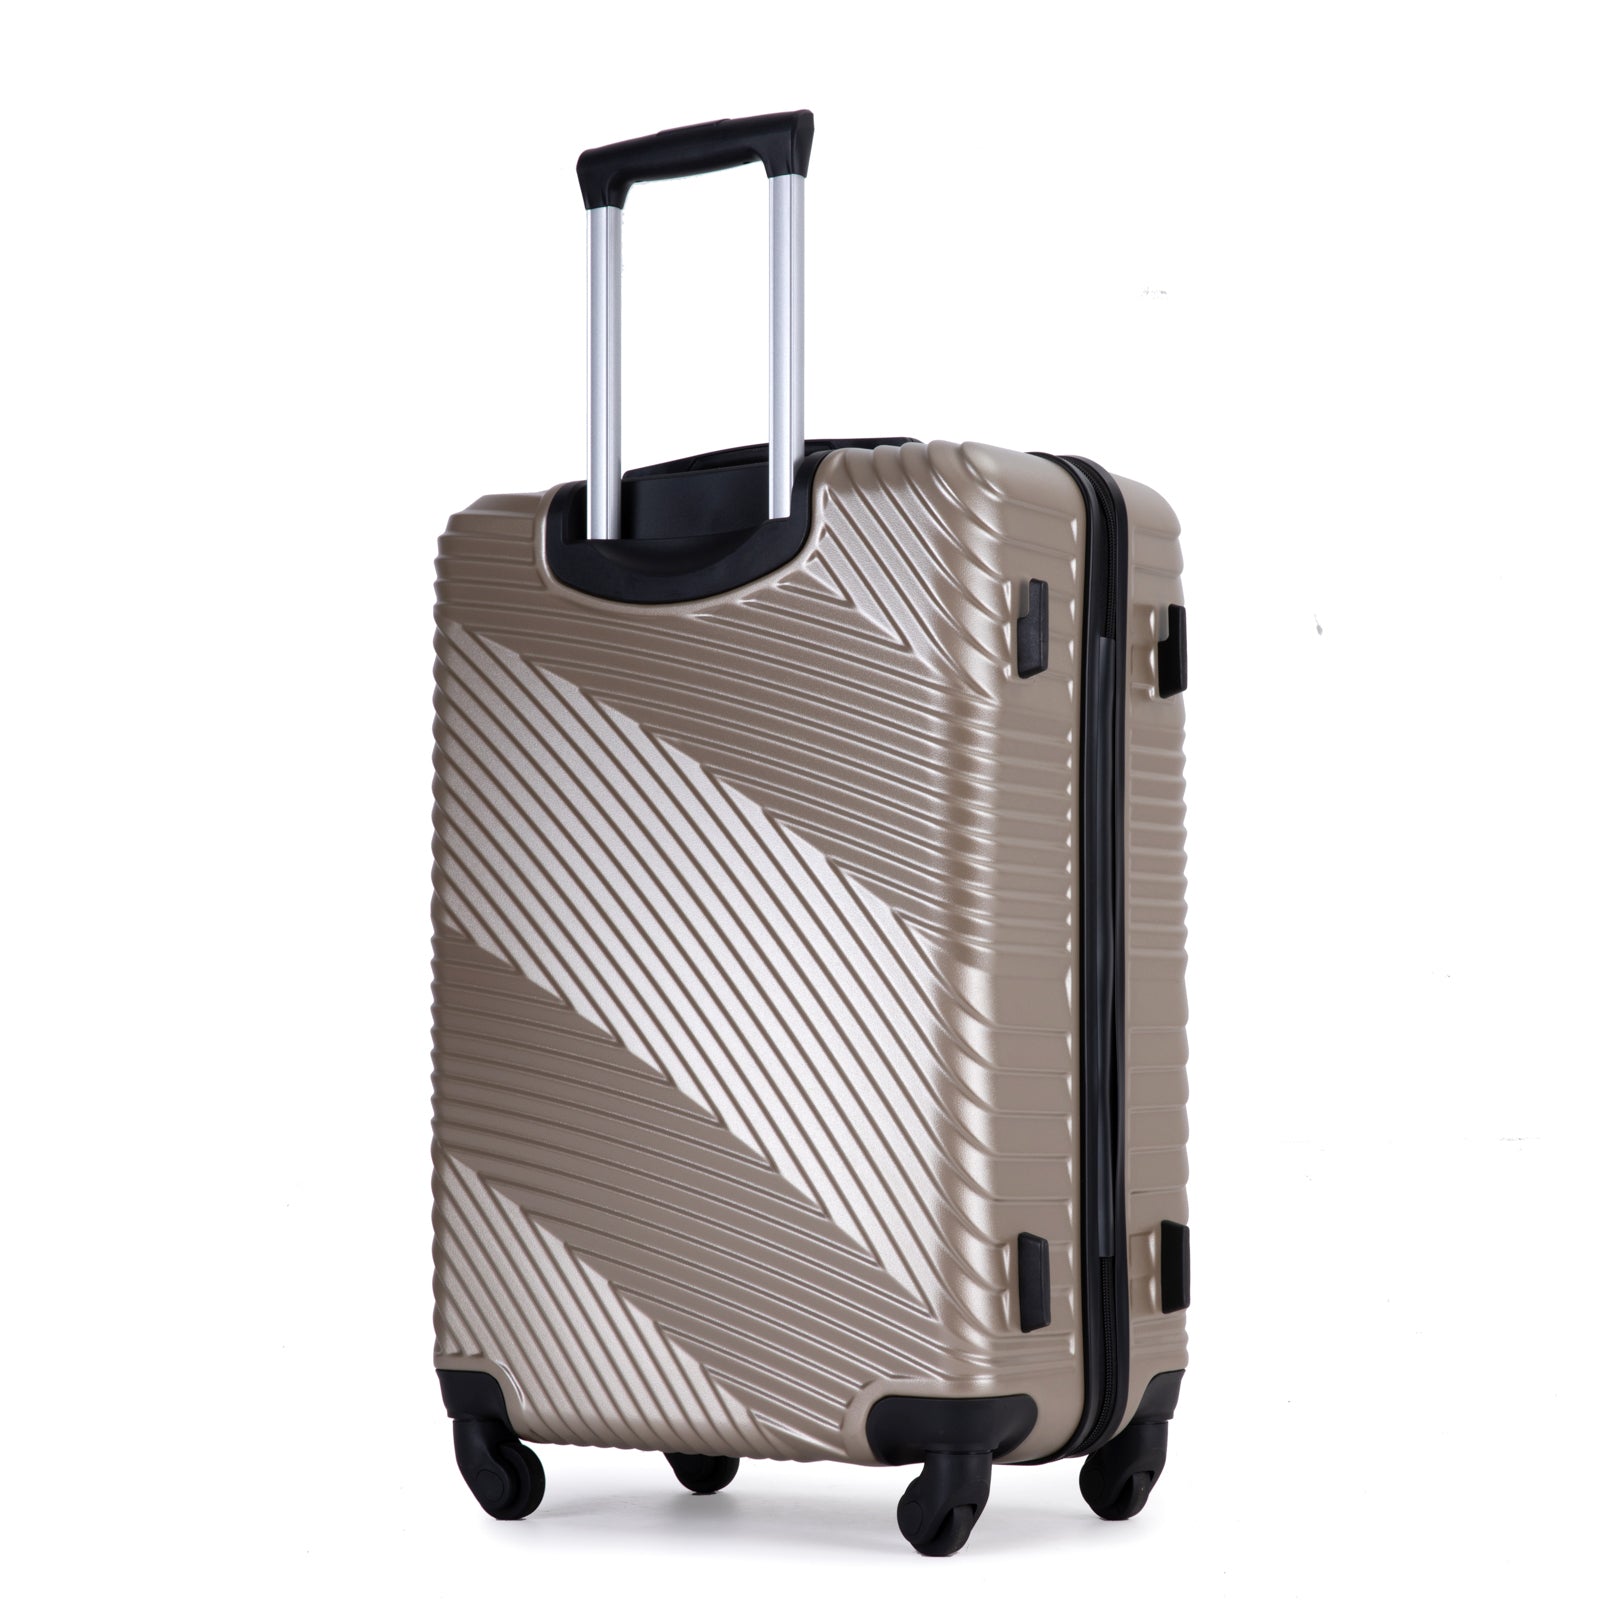 3 Piece Luggage Sets PC ABS Lightweight Suitcase with gold-abs+pc